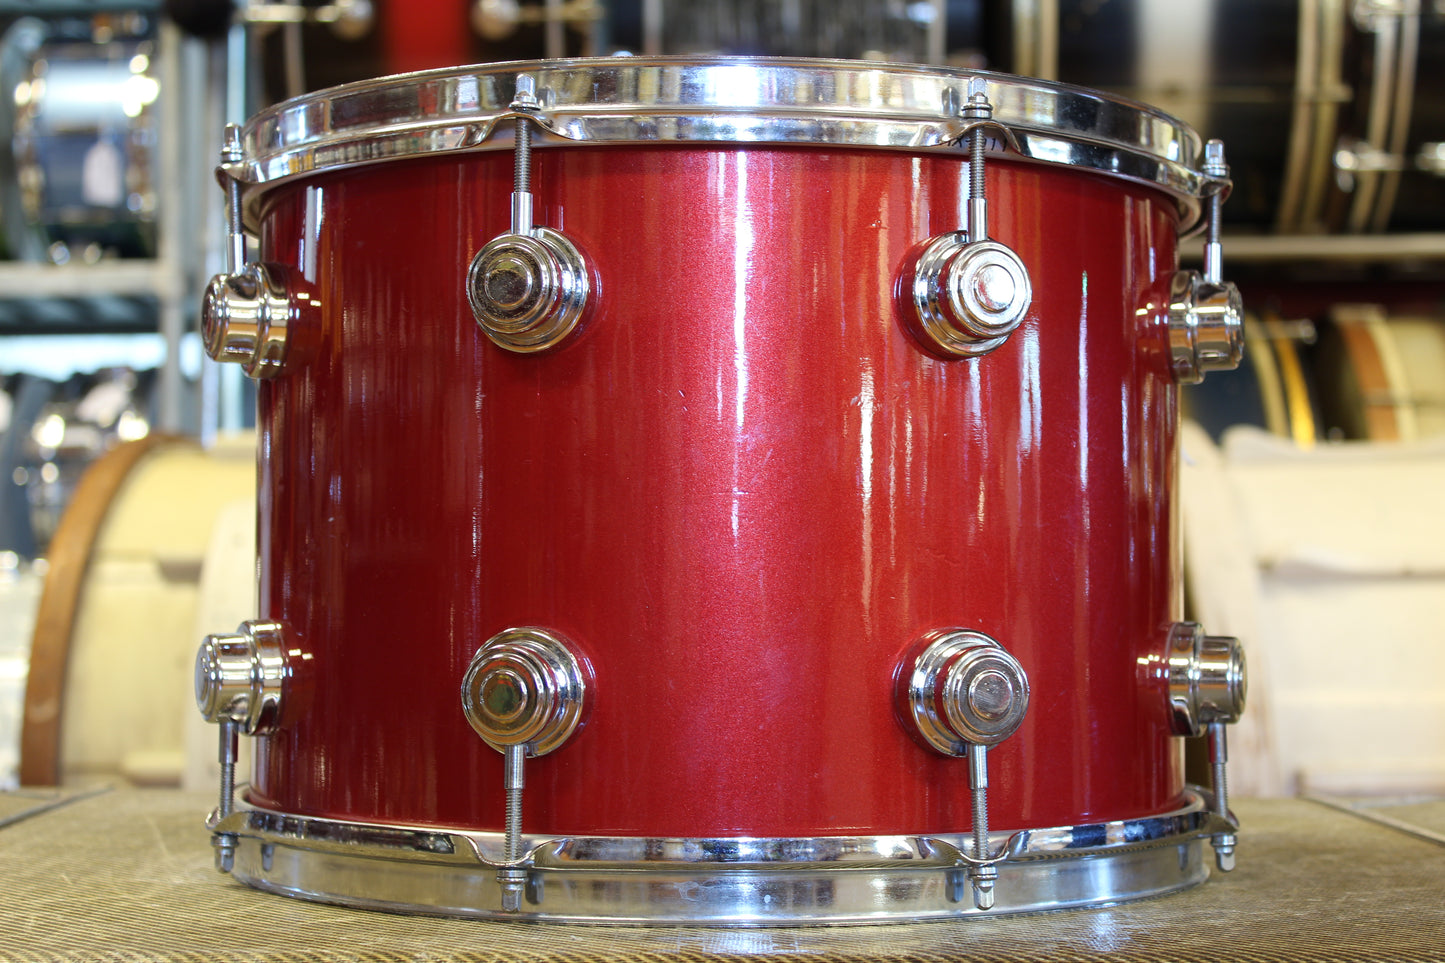 1970s Camco Chanute era kit in Candy Apple Red 14x24 10x14 16x18